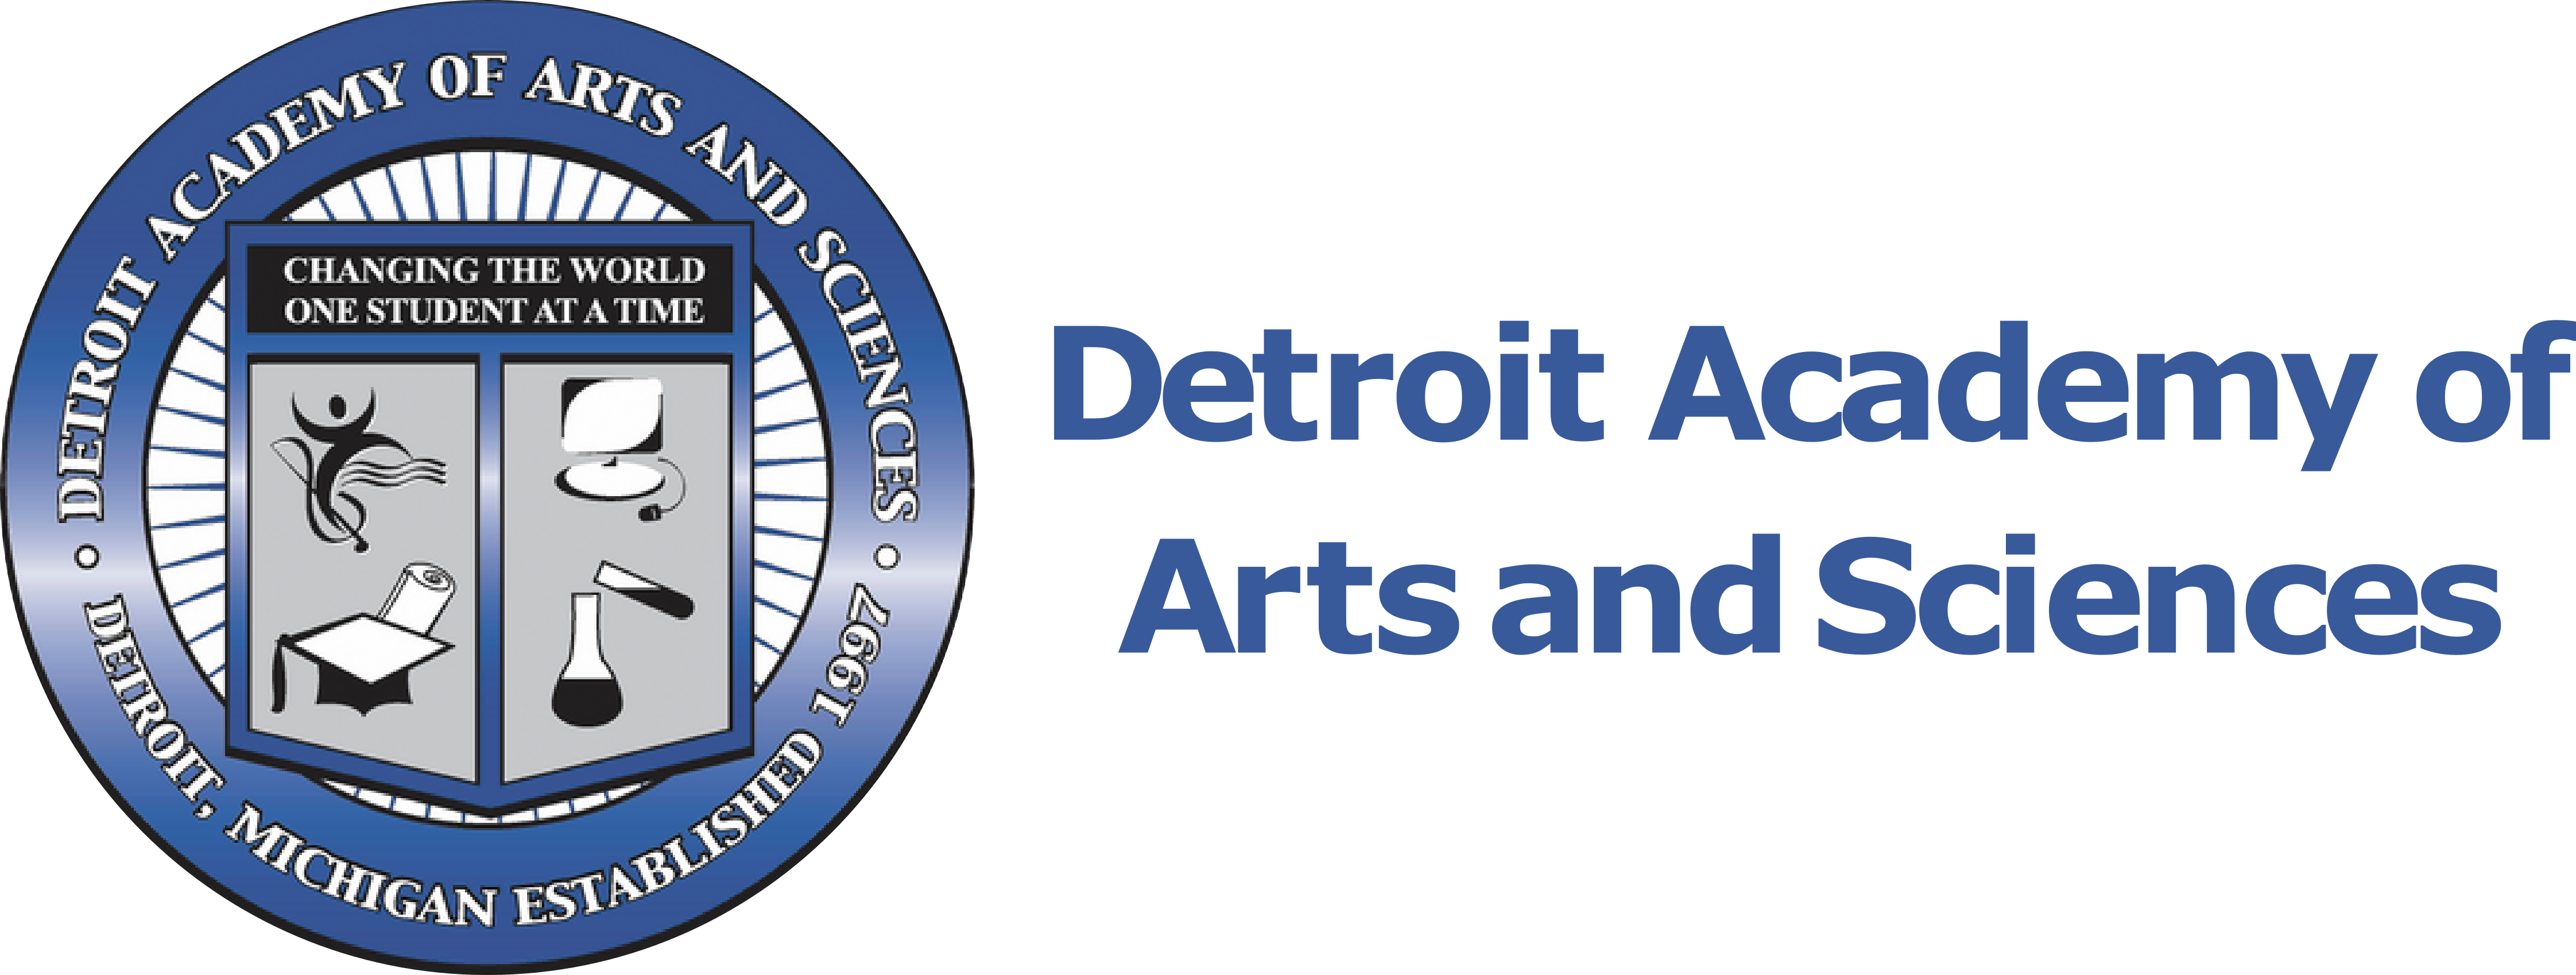 Detroit Academy of Arts and Sciences Logo and name